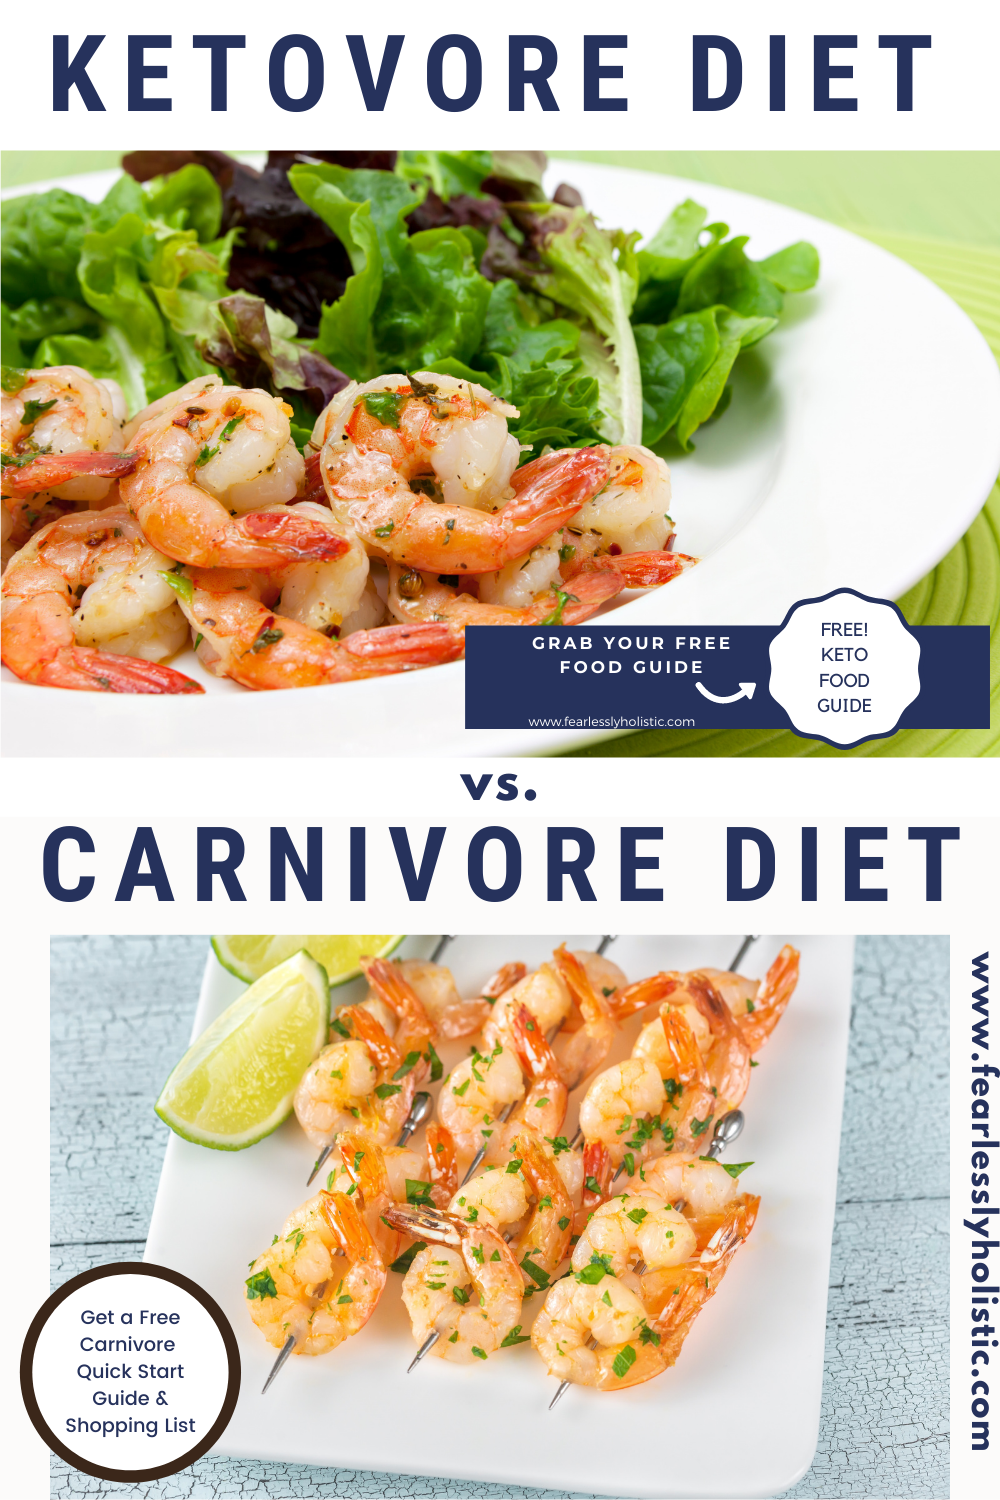 Ketovore vs Carnivore: Which Is Better?